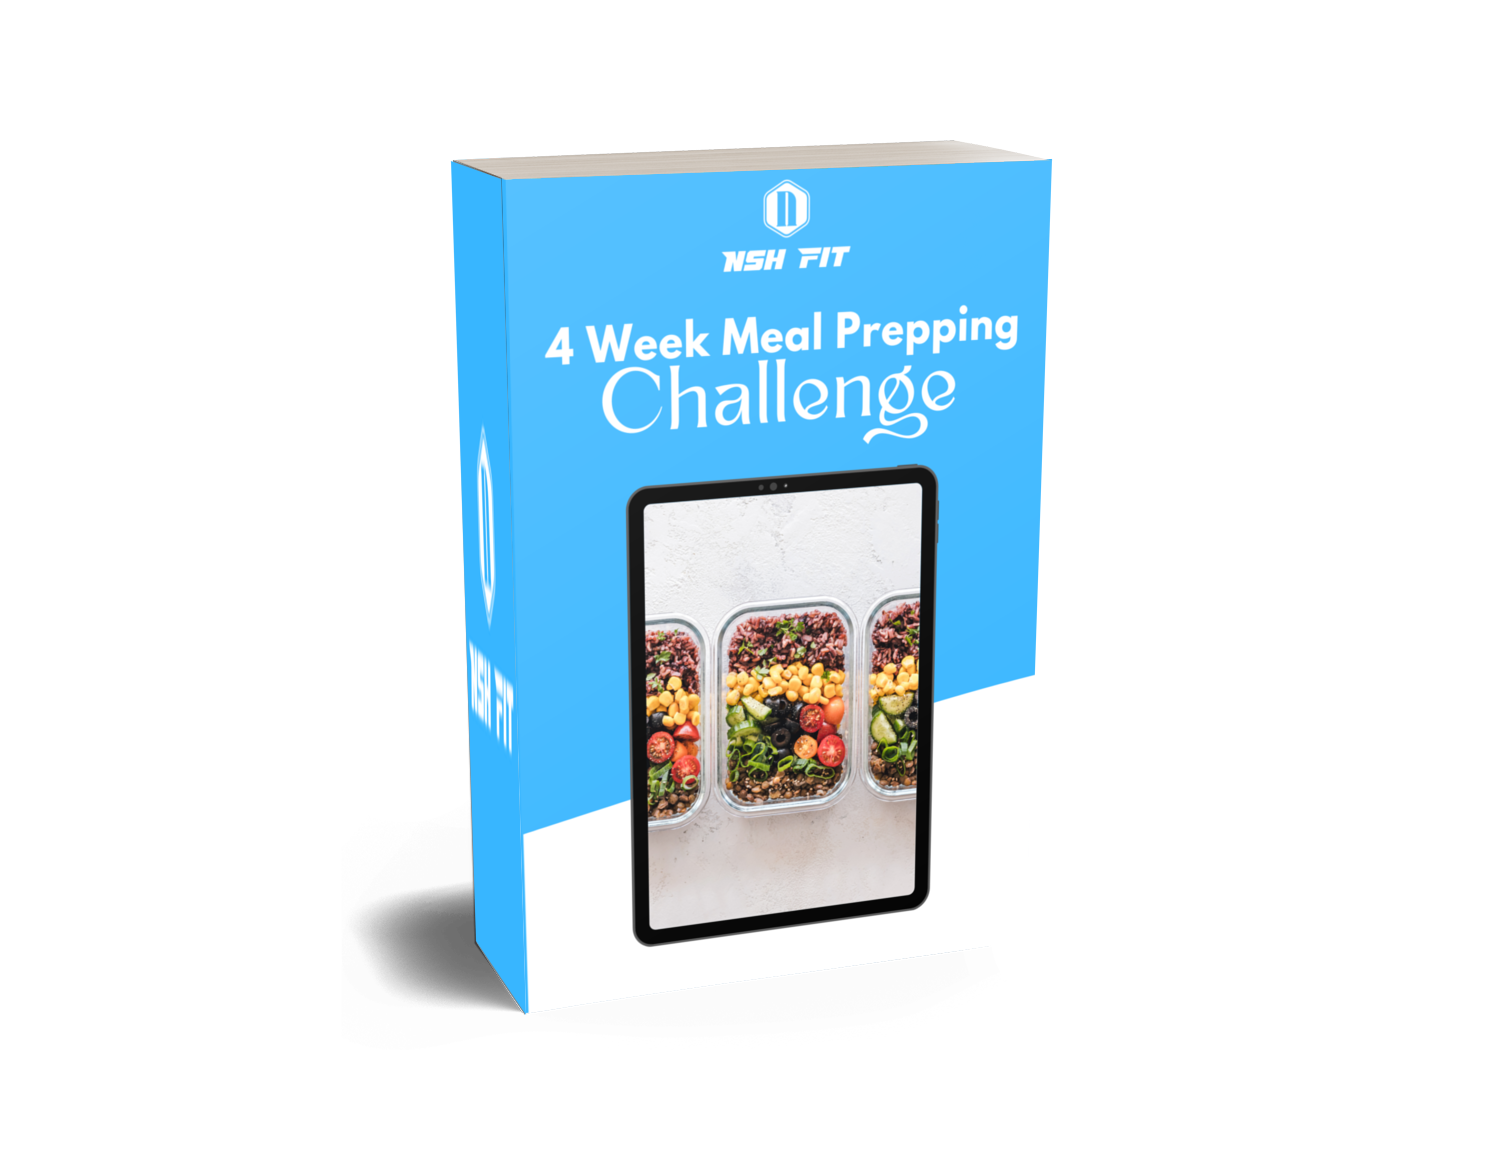 Meal Prepping: A 4-week Challenge